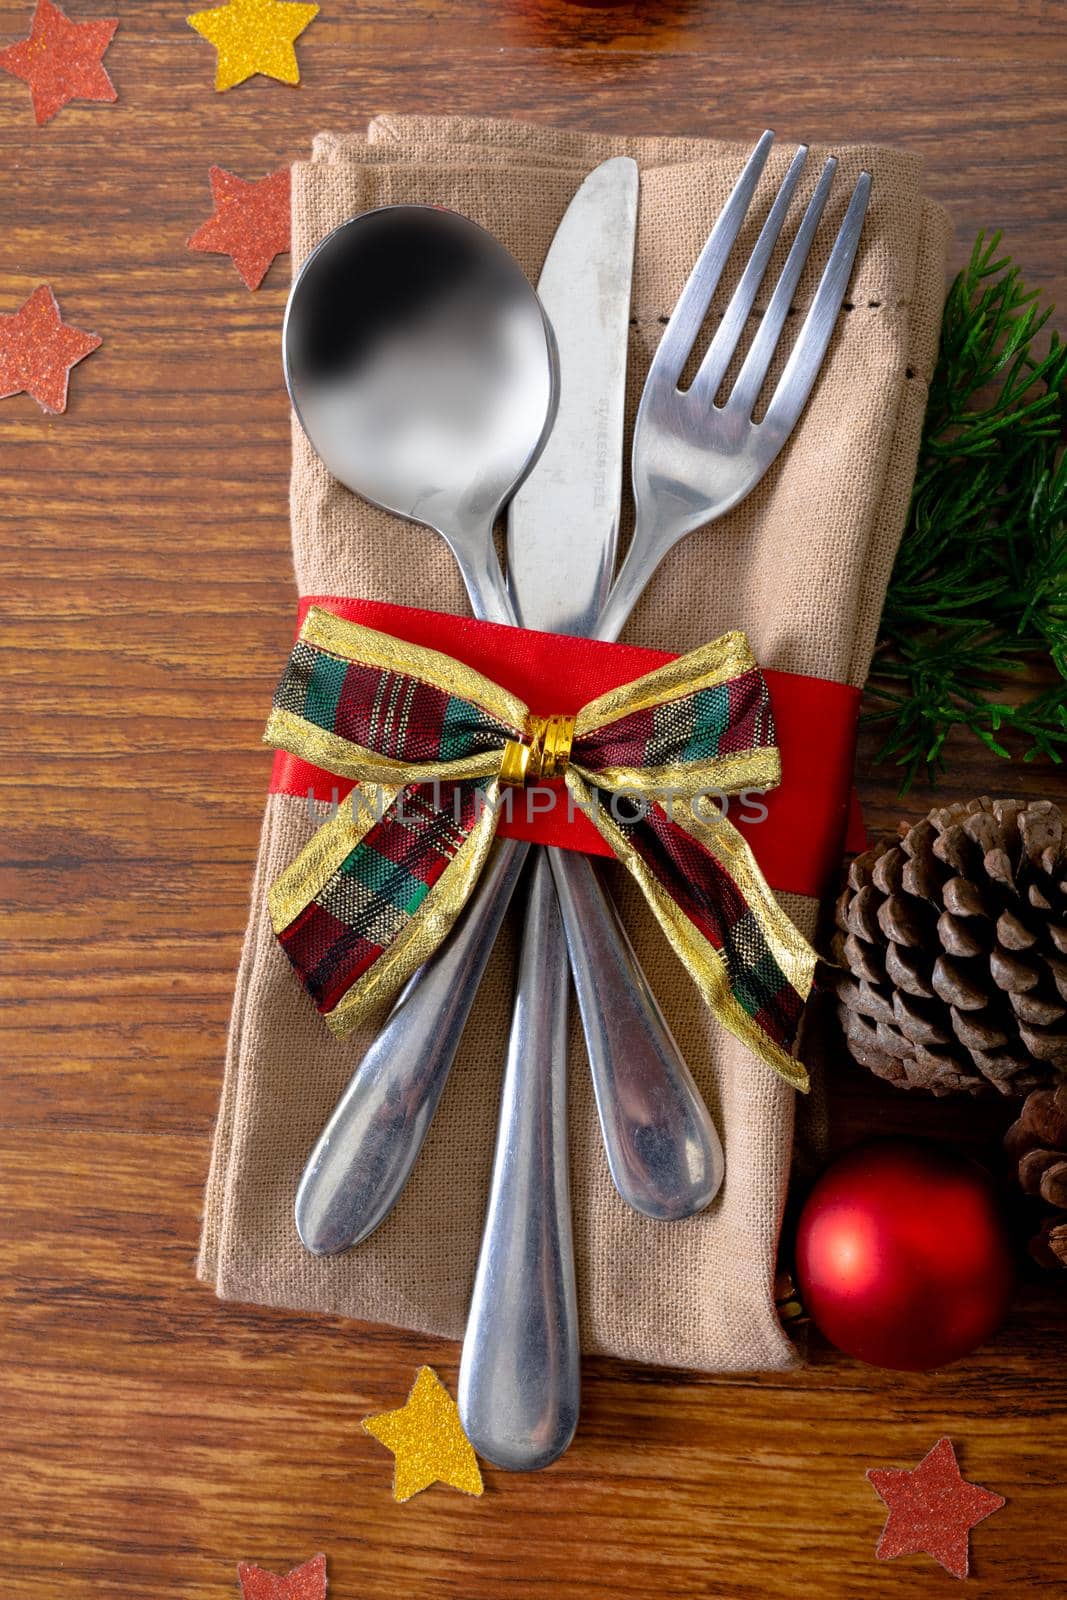 Composition of christmas decorations with cutlery and napkin tied with bow on wooden background by Wavebreakmedia